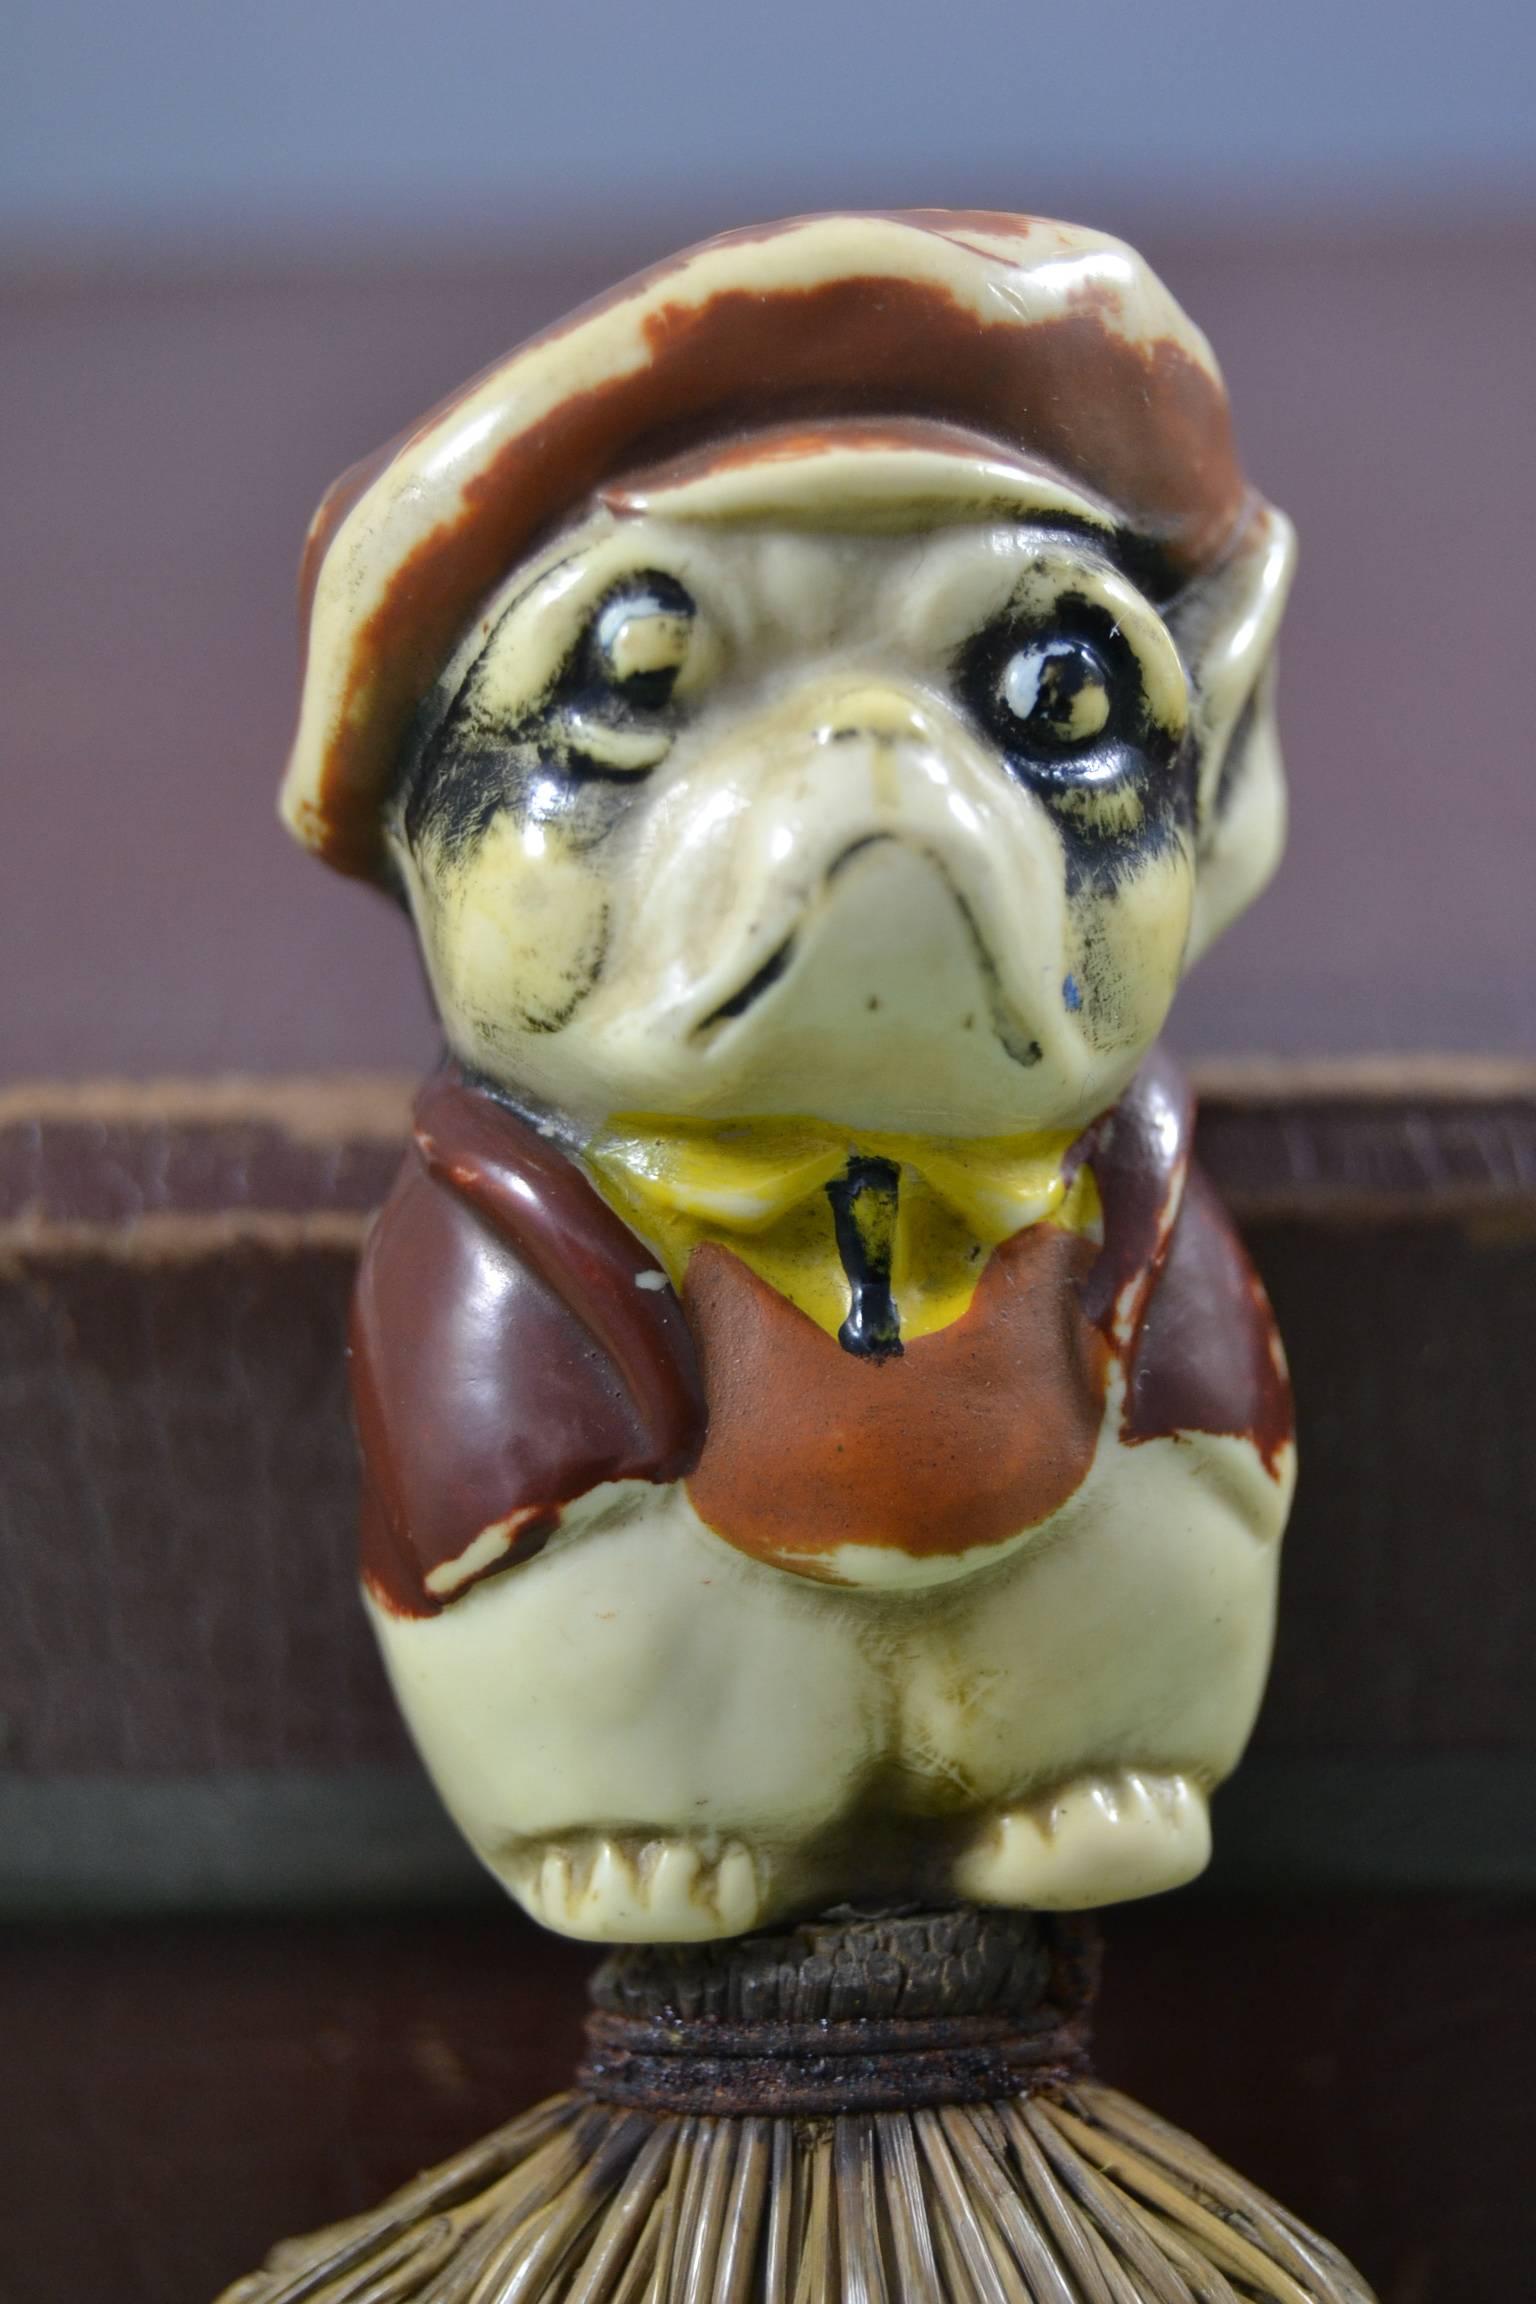 Antique hand brush with a Bulldog dog on top. Art Nouveau, Art Deco figural hand brush
This figural mini broom, table broom wears a cartoon, comical bulldog character. He wears a hat, a jacket and pants and is made of solid celluloid and